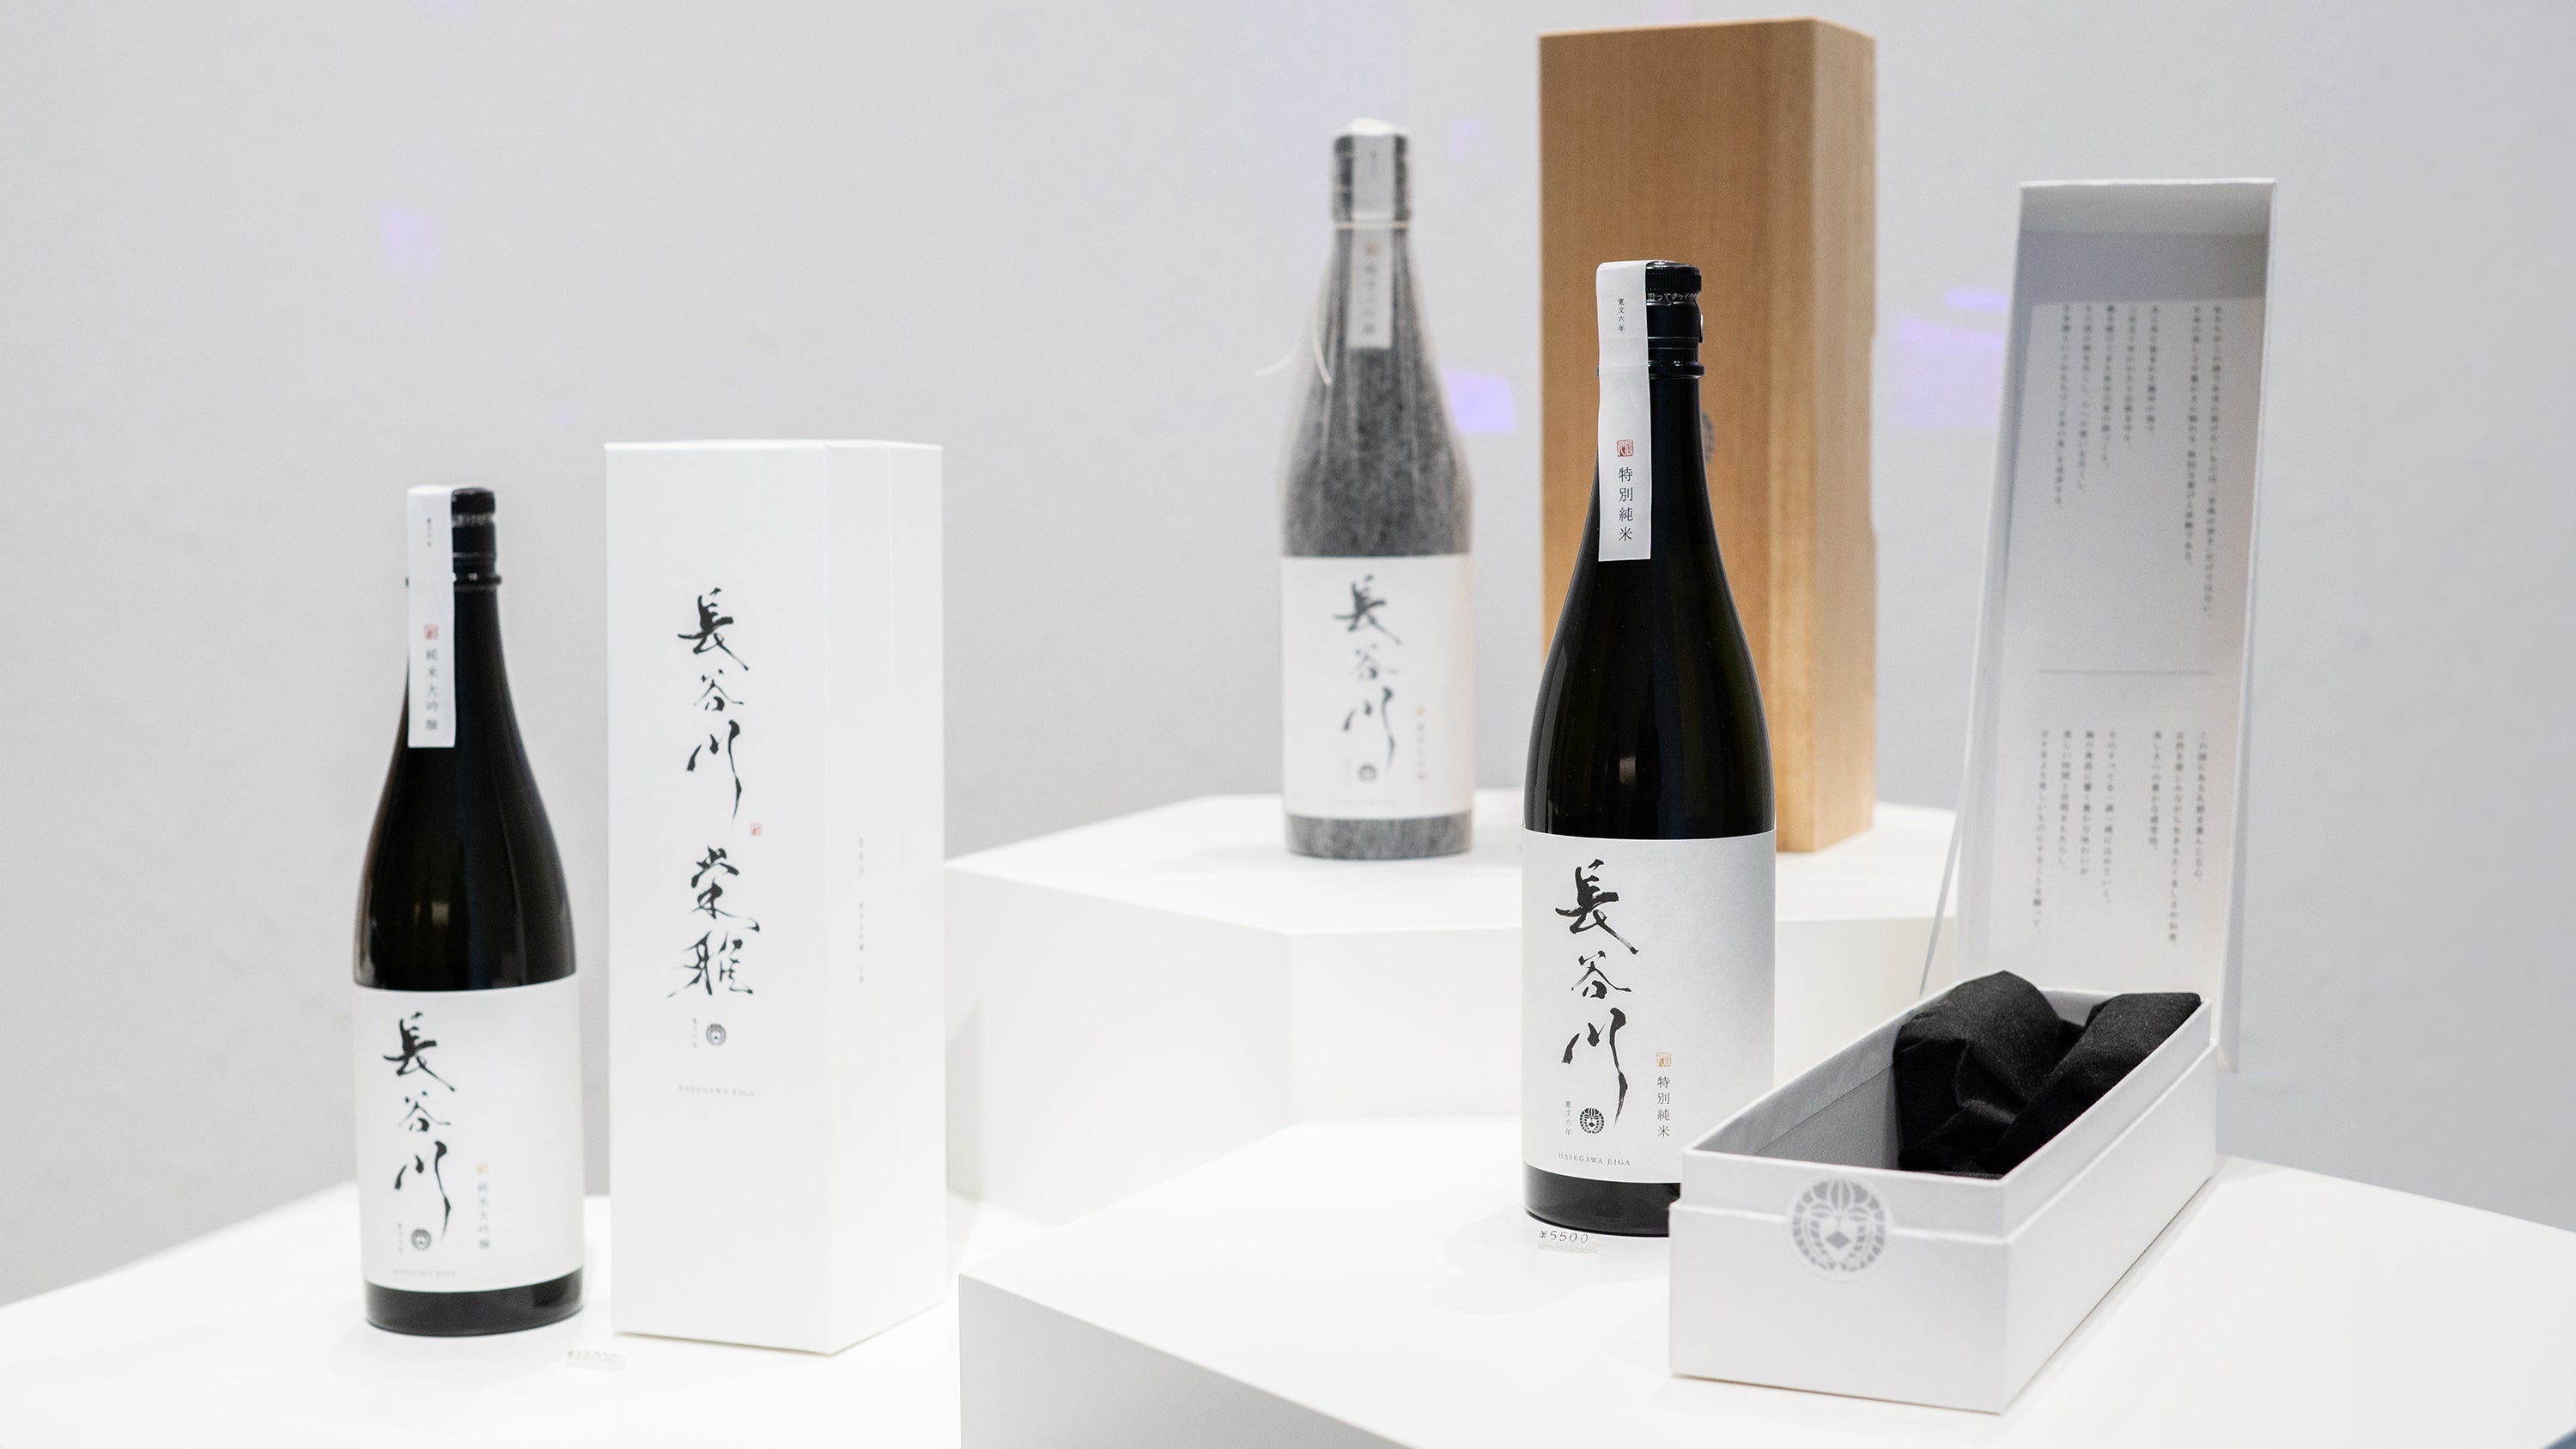 Finding An Hour's Peace in Roppongi with Japanese Sake